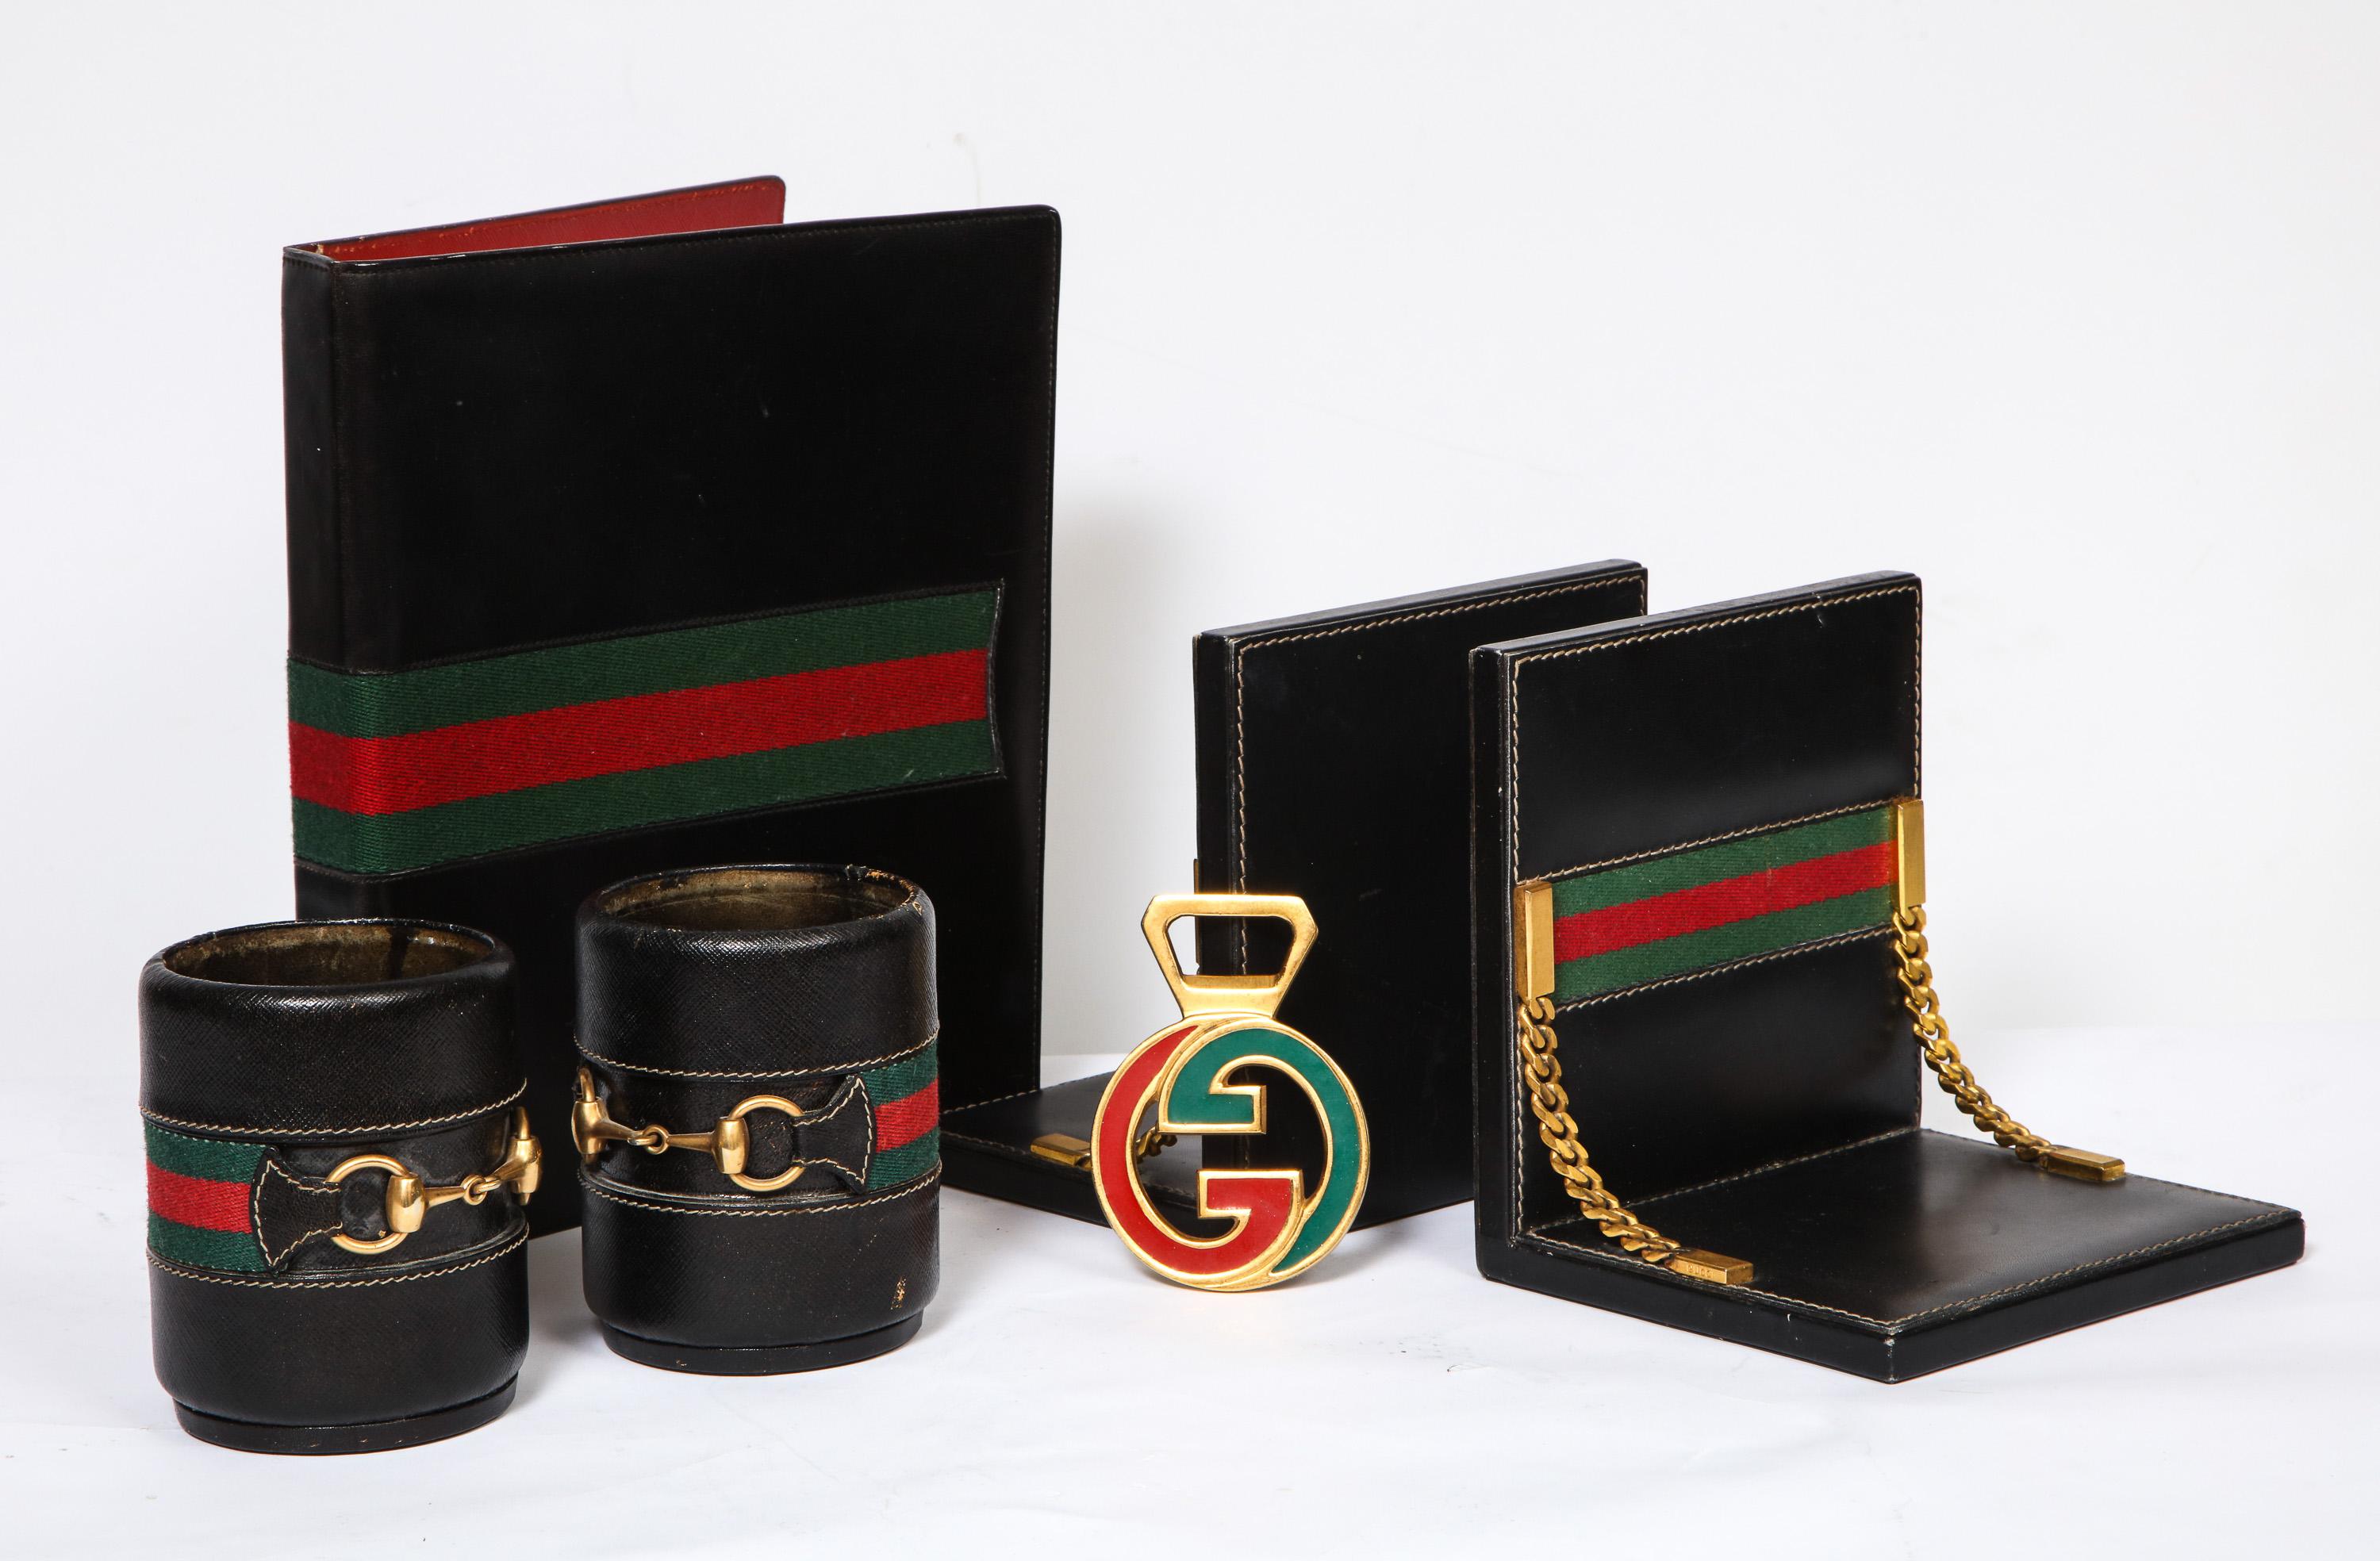 Rare vintage Gucci 8 piece executive Italian leather desk set accessories, 1979
 
Made from black leather with green and red stripes. 

Includes: 
Planner binder with calendar inserts from 1979, and notebook. All original and unused.
Pair of